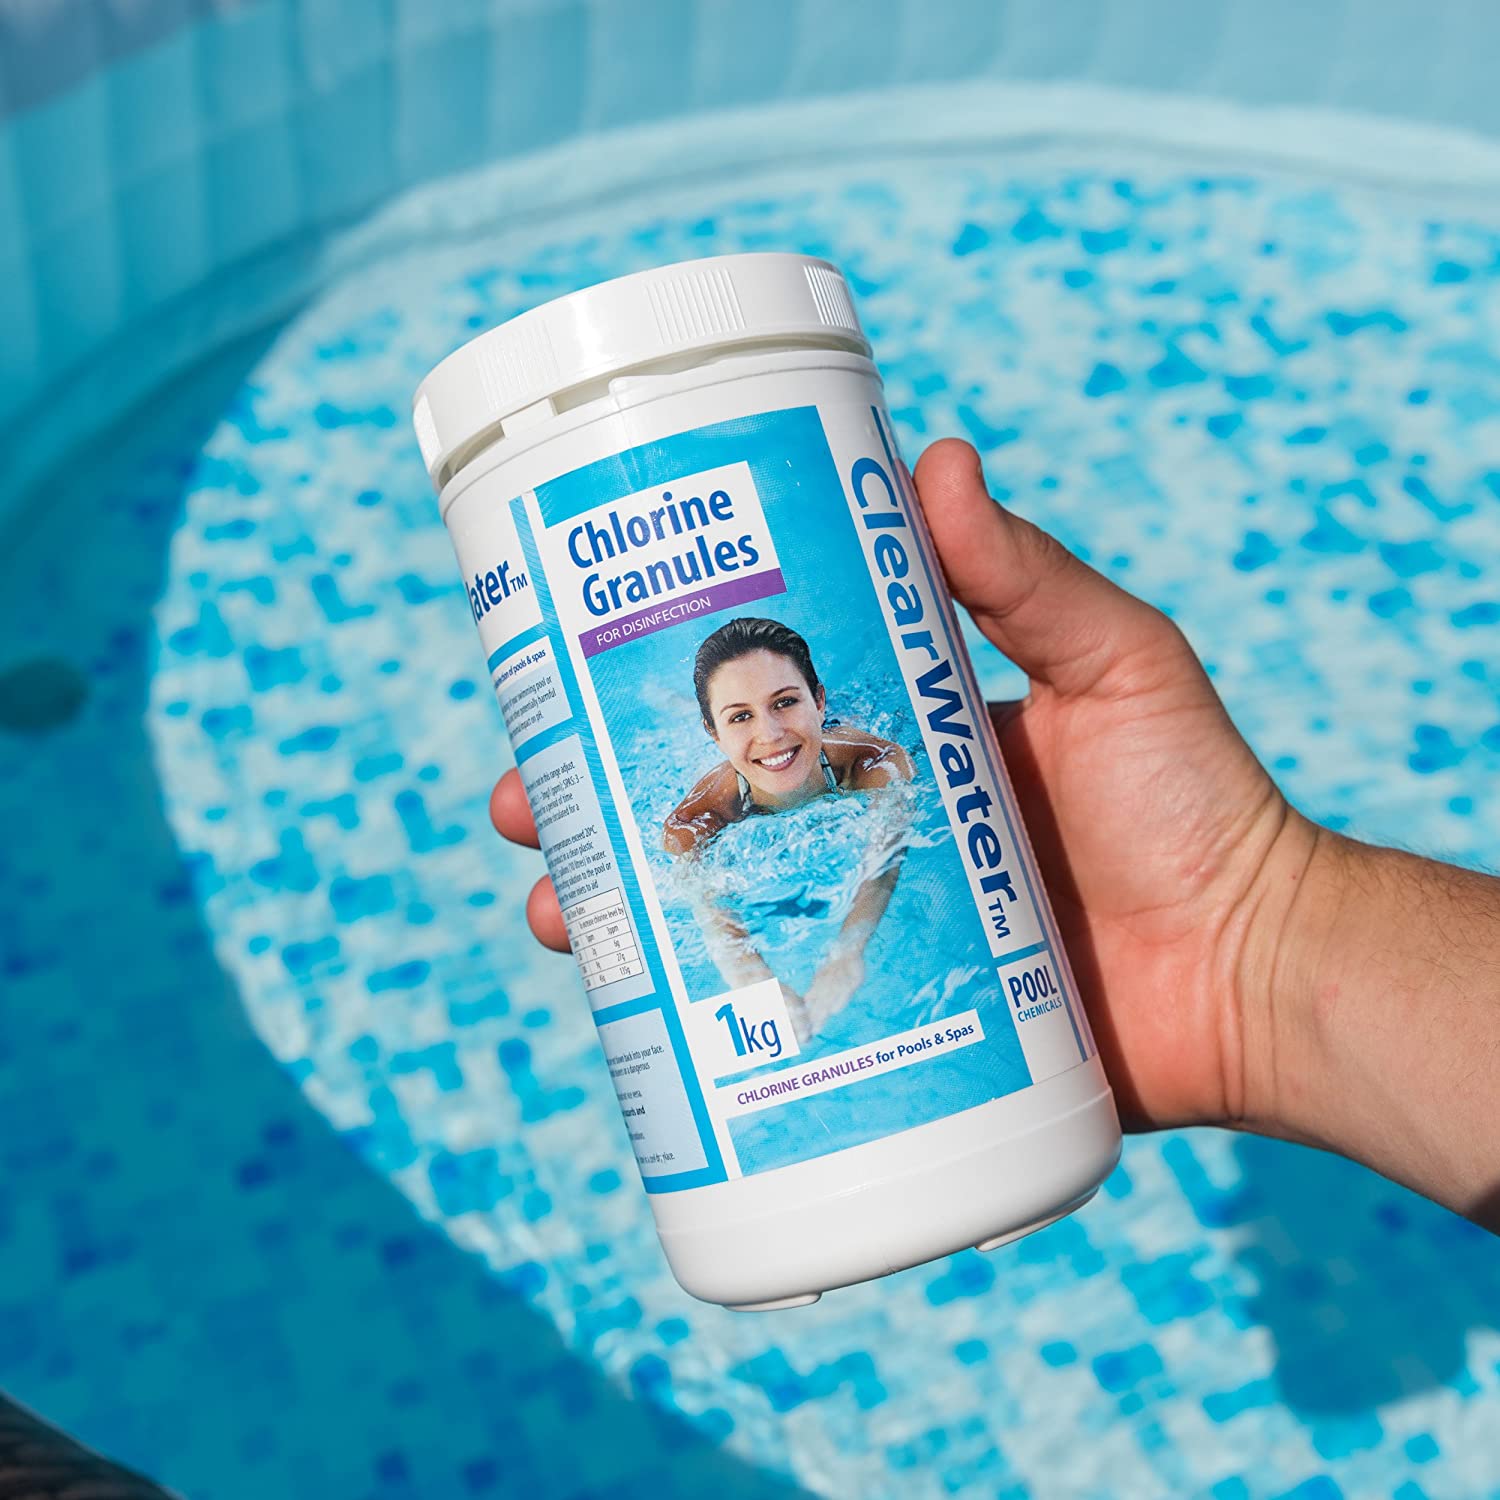 1kg Clearwater CH0010 Chlorine Granules for Hot Tub Spa & Swimming Pool